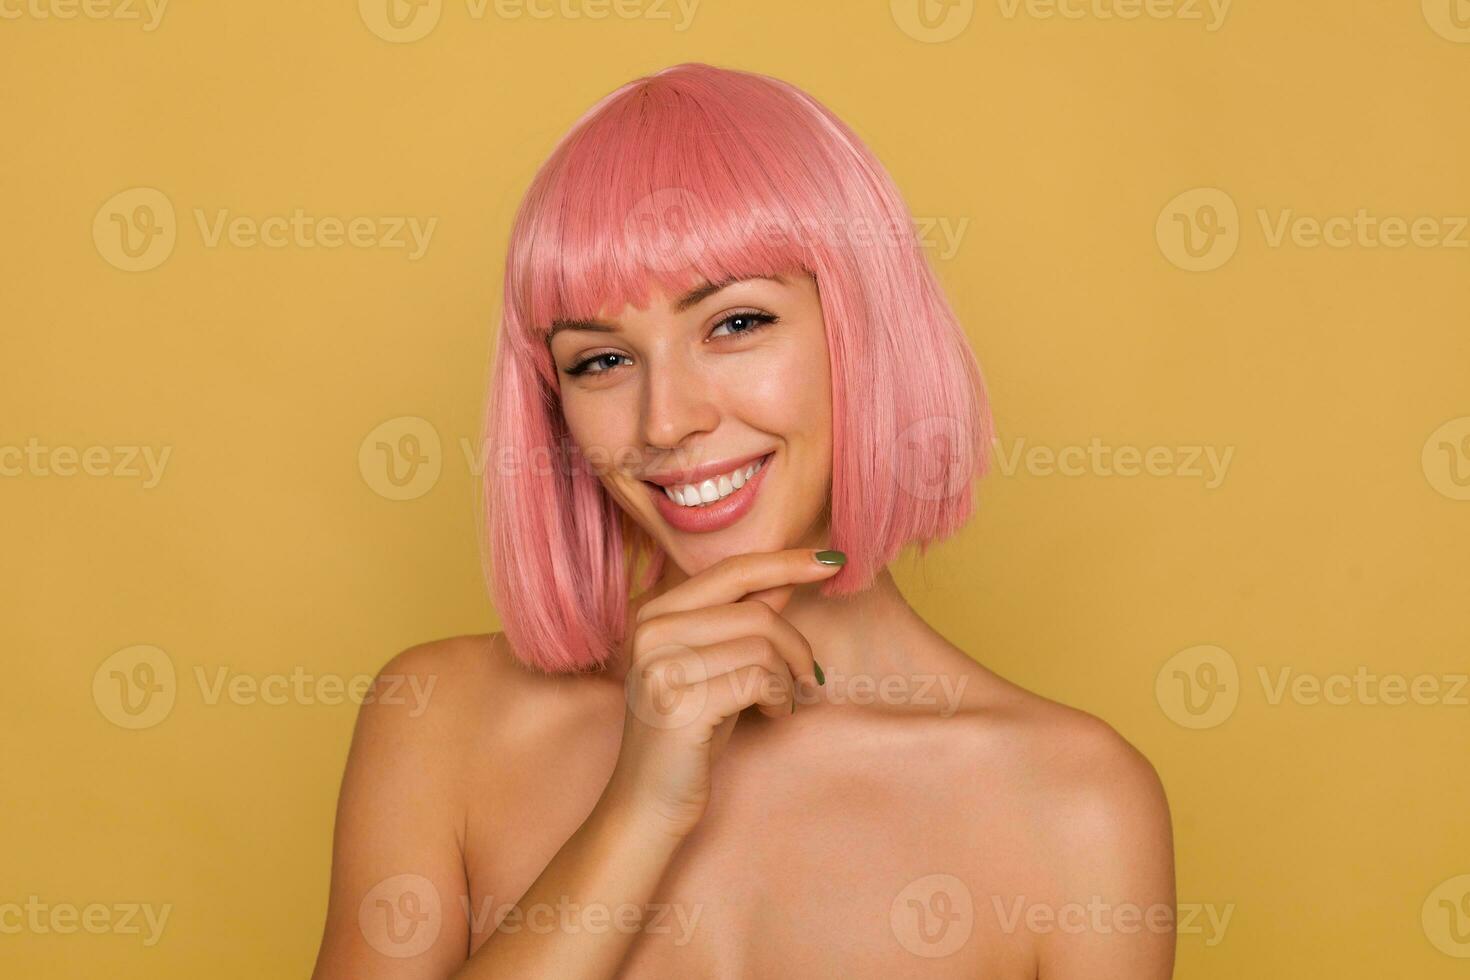 Portrait of young happy blue-eyed pink haired female looking happily at camera with charming smile, holding raised hand on her chin while posing over mustard background photo